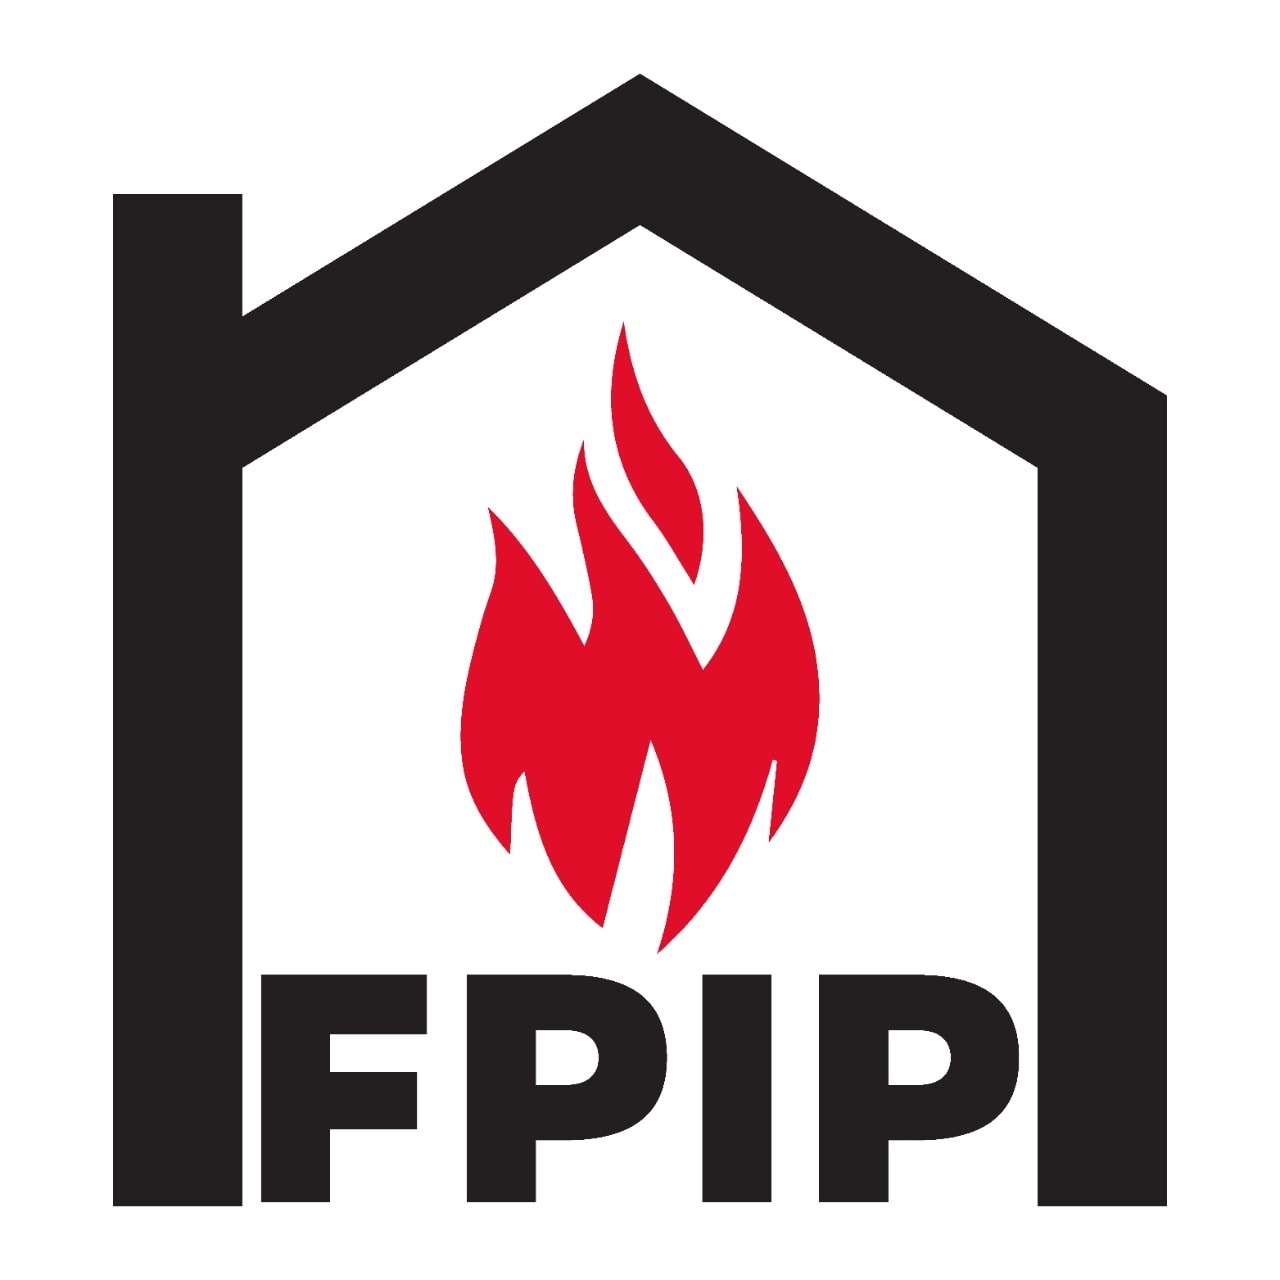 Fire Protection Industry of Pakistan